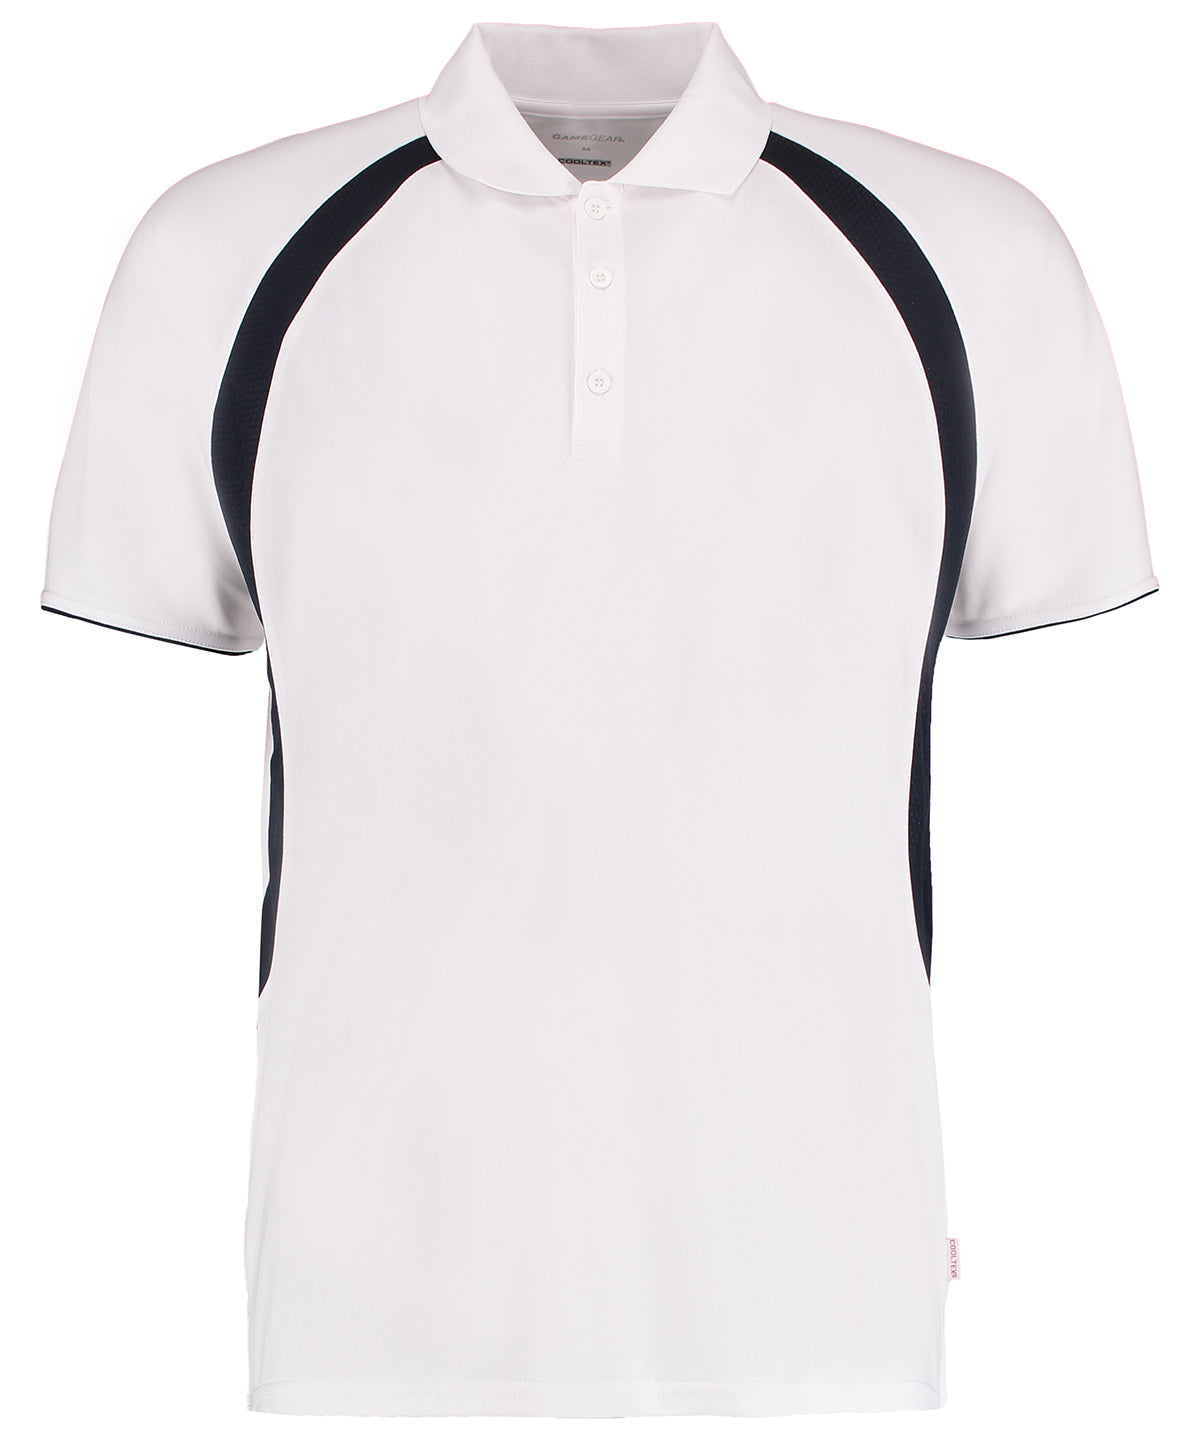 Personalised Polo Shirts - White GameGear Gamegear® Cooltex® riviera polo shirt (classic fit)